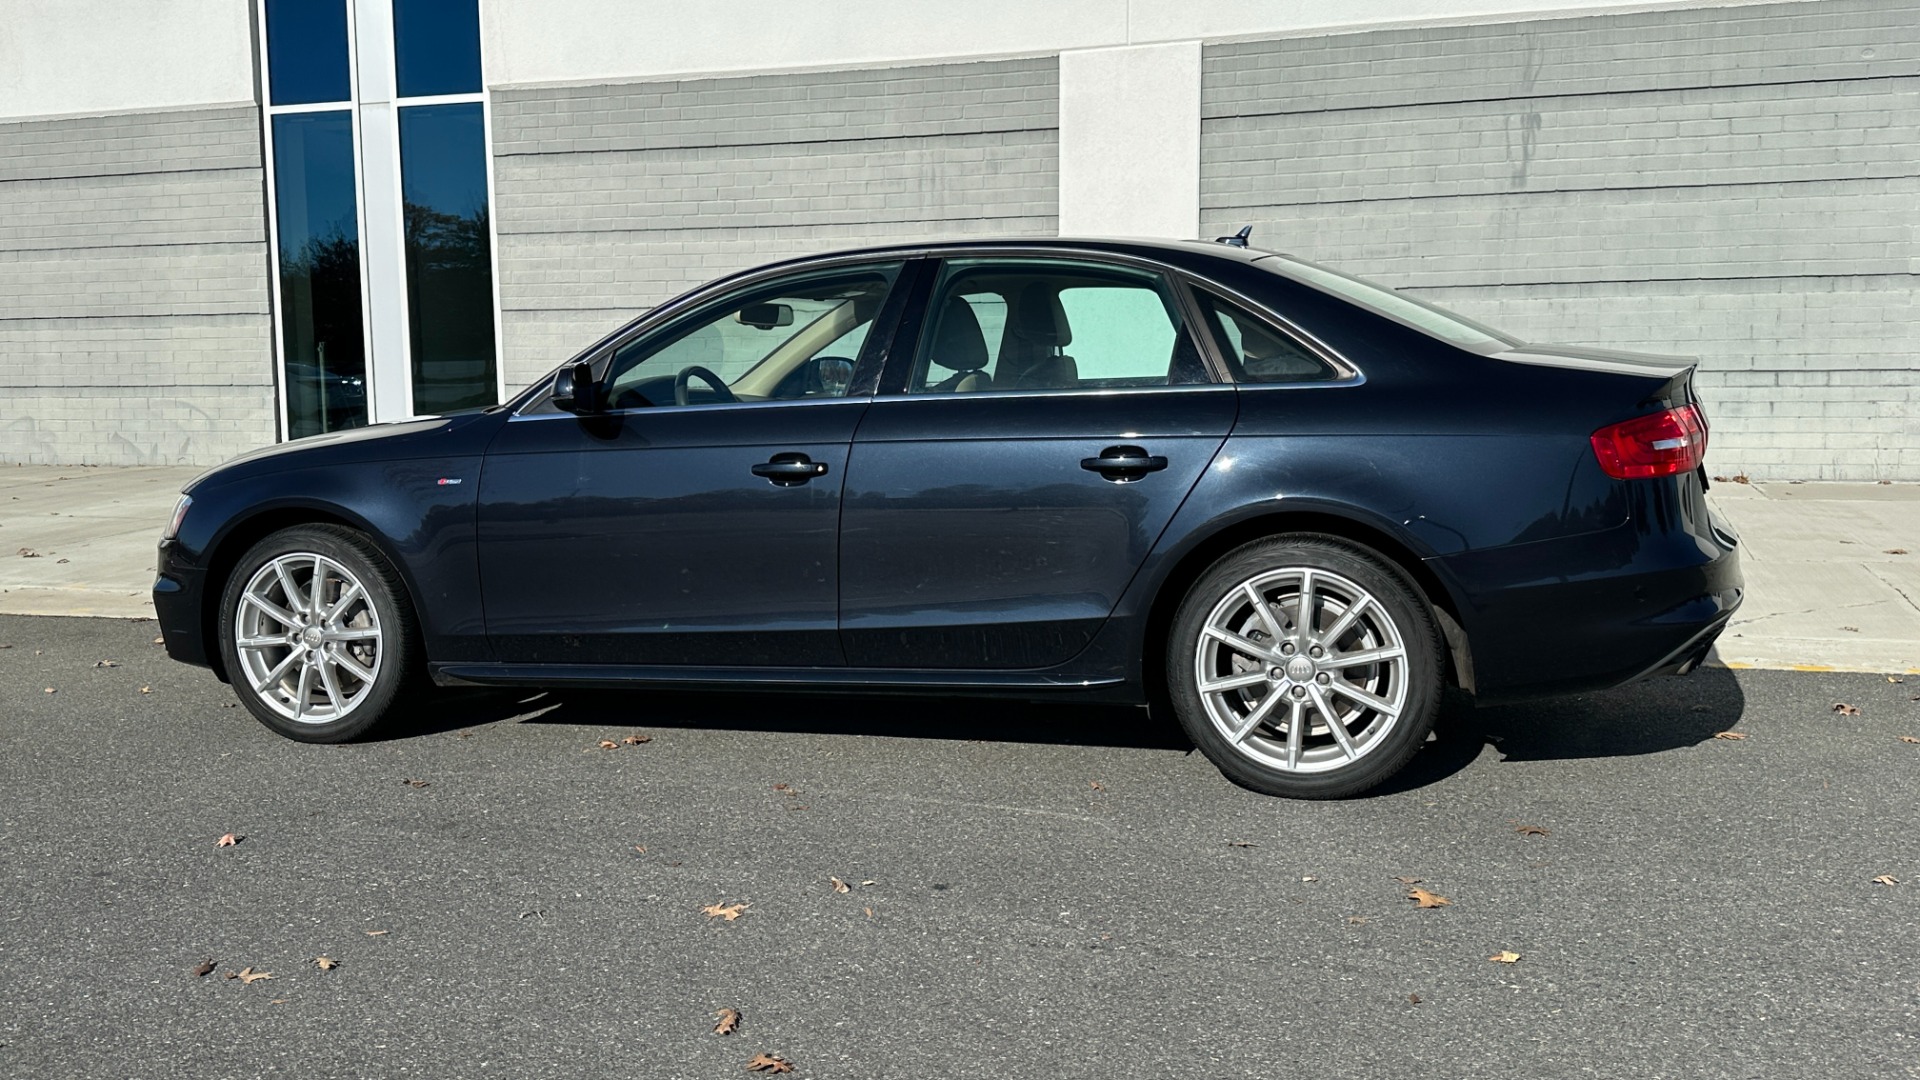 Used 2014 Audi A4 PREMIUM PLUS / NAVIGATION PLUS / BLINDSPOT ASSIST / LEATHER / SUNROOF for sale $19,298 at Formula Imports in Charlotte NC 28227 3